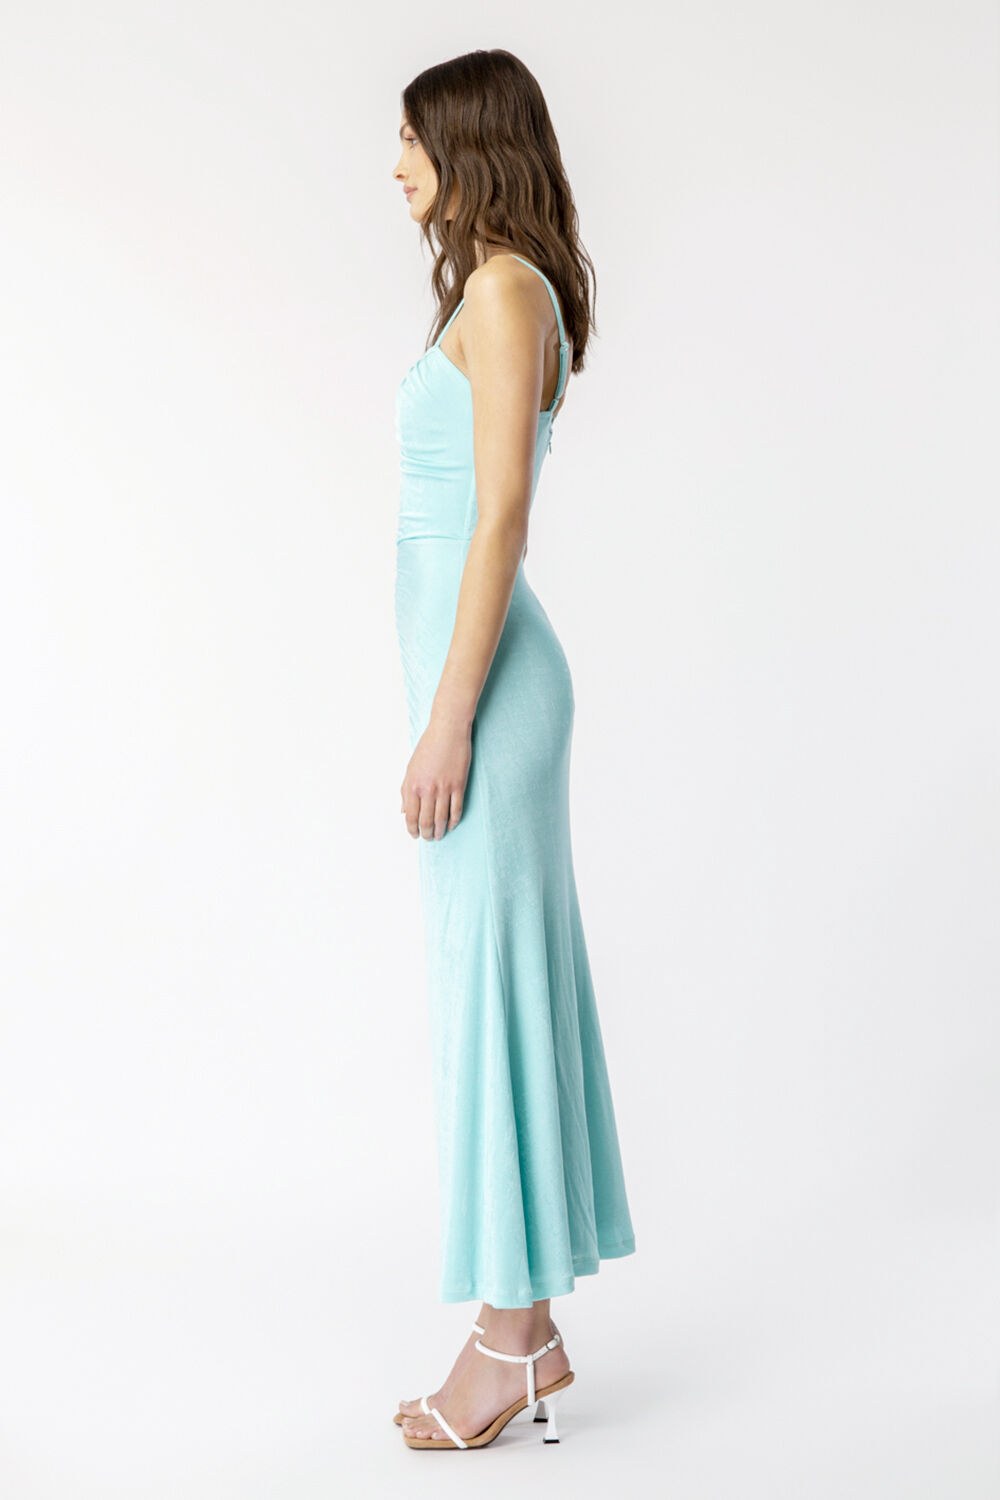 ADALYN RUCHED DRESS in colour CLEARWATER